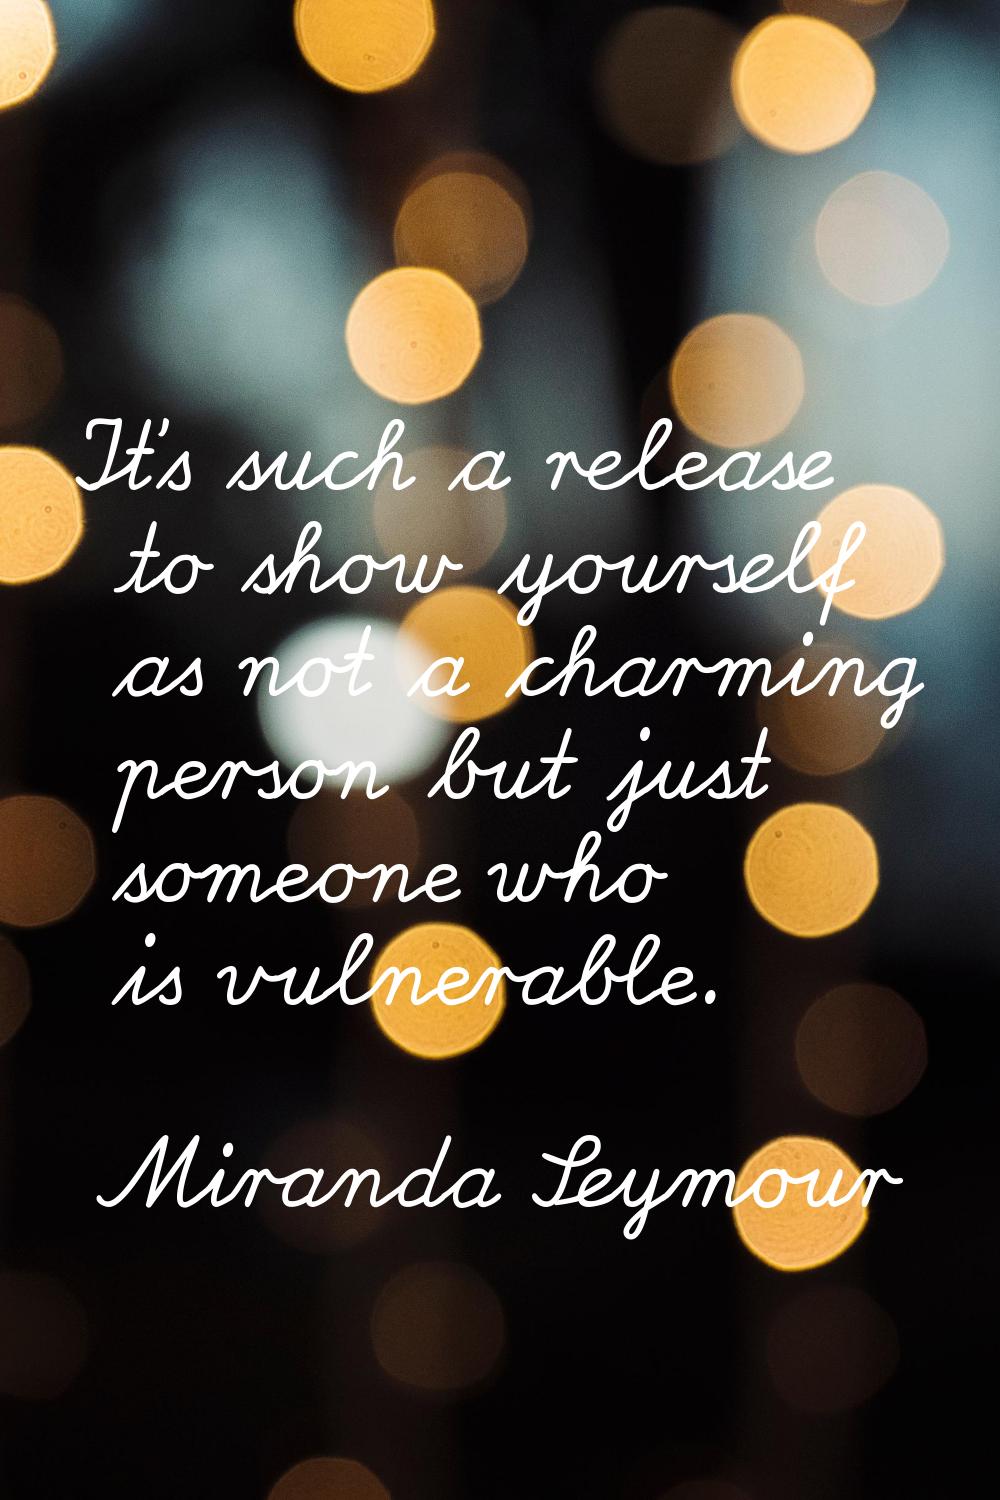 It's such a release to show yourself as not a charming person but just someone who is vulnerable.